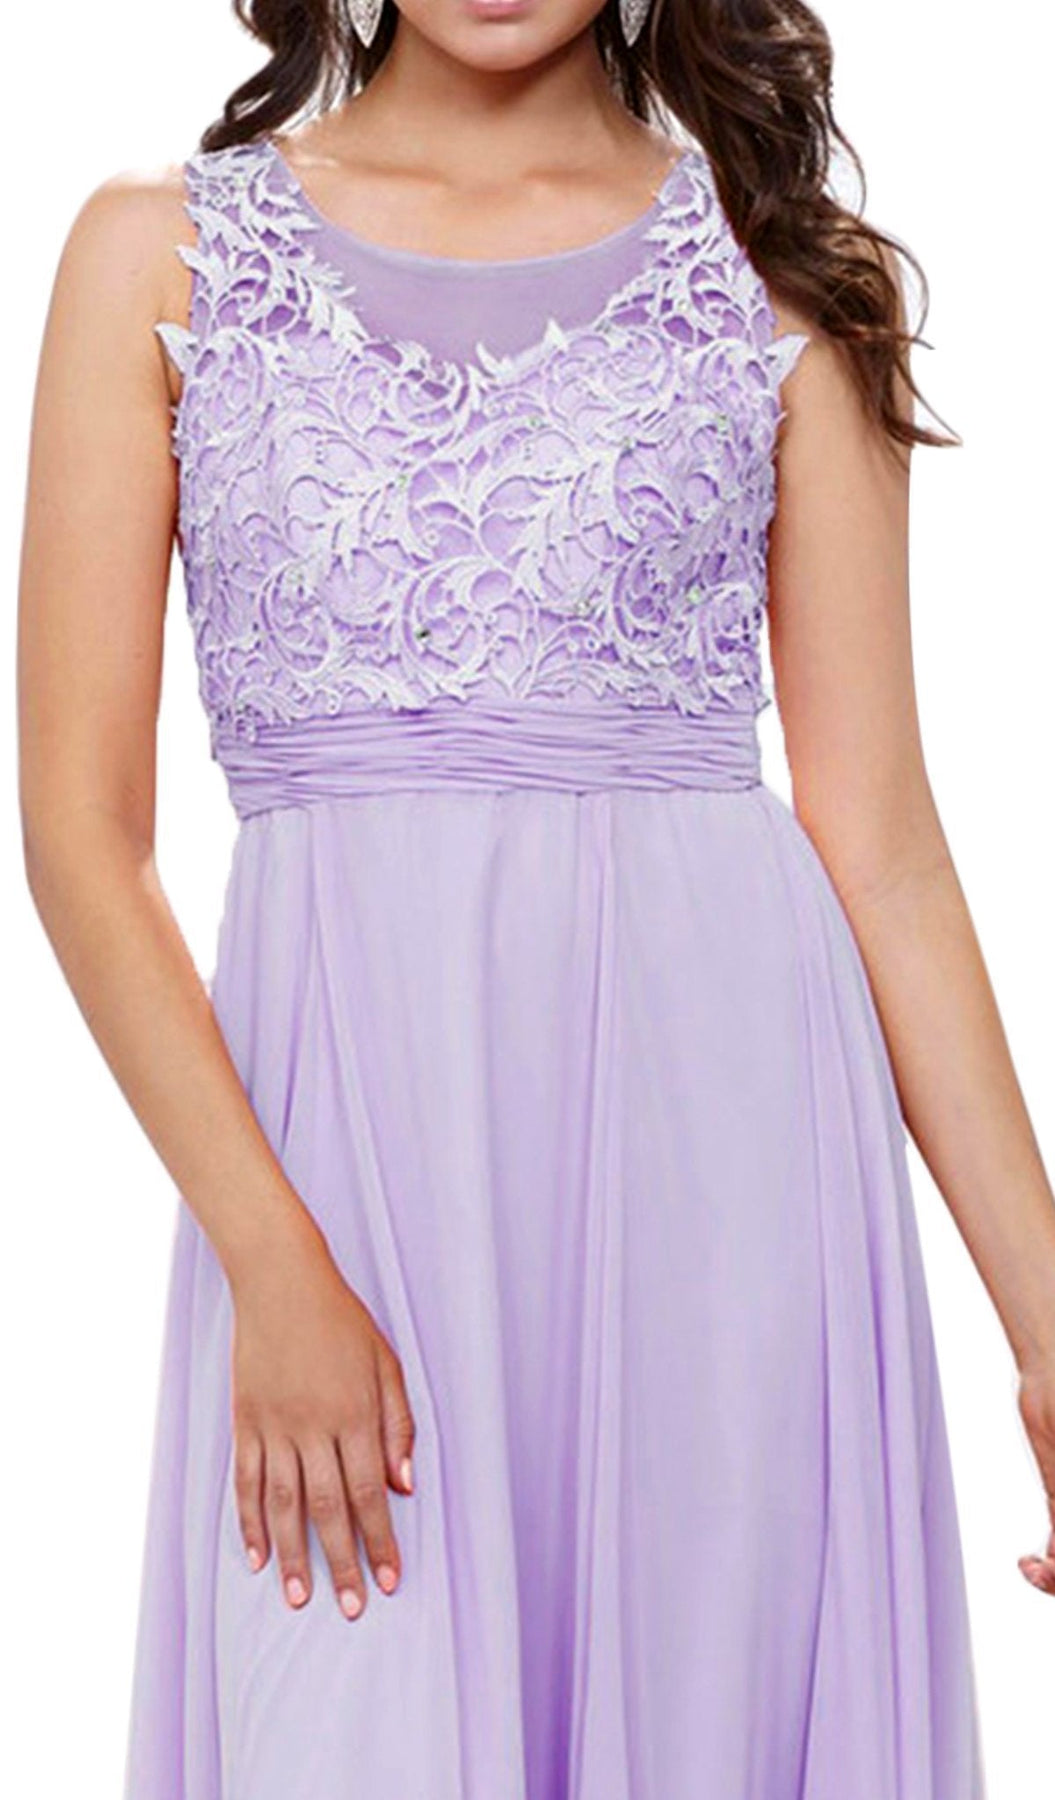 Nox Anabel - 8334 Illusion Applique Ornate Gown Special Occasion Dress XS / Lilac